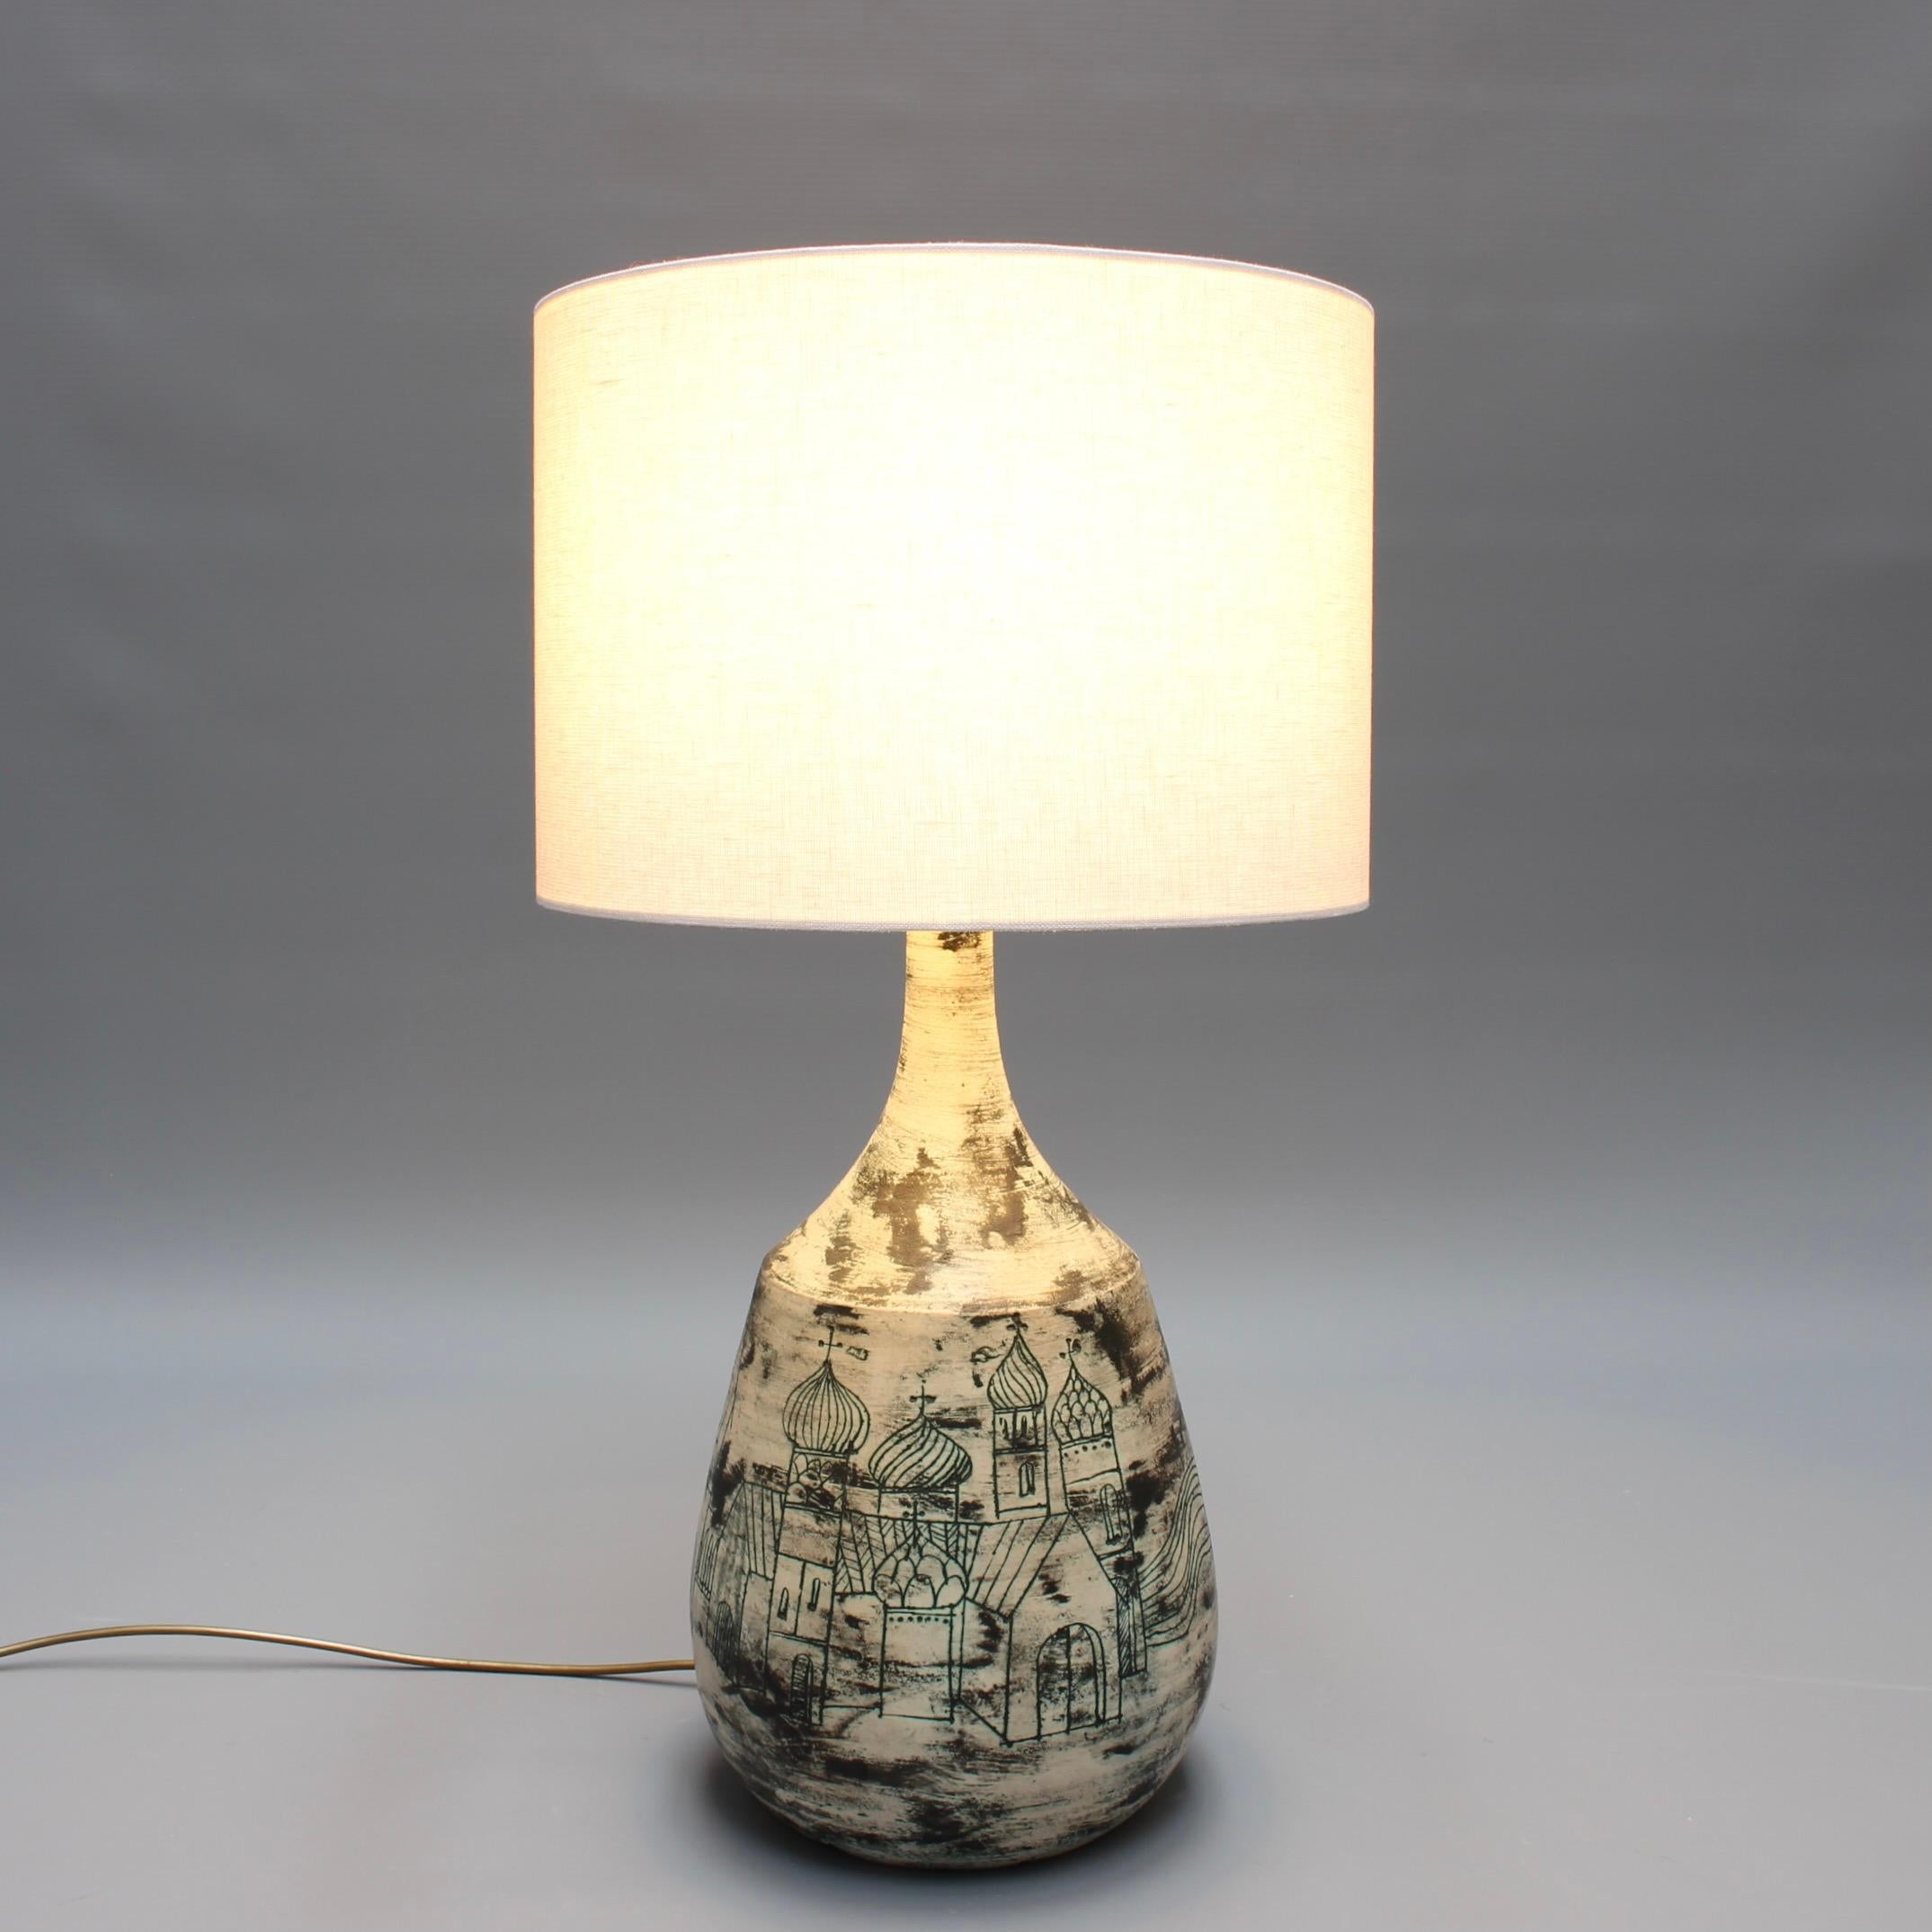 Vintage French Ceramic Lamp with Russian Motif by Jacques Blin c. 1950s, Large For Sale 3